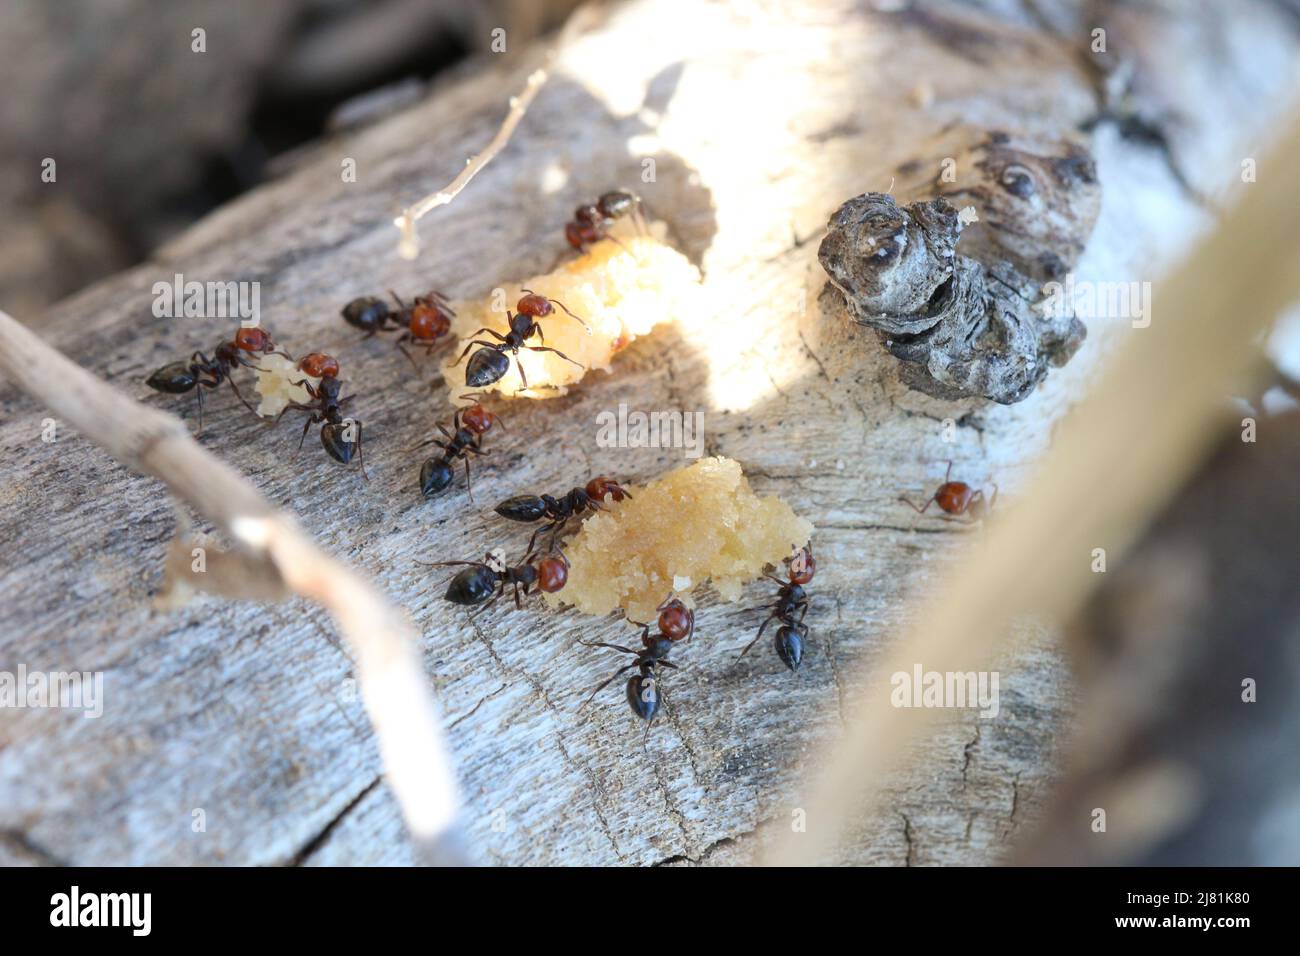 Crematogaster ants feeding on a biscuit at a beach. Croatia. Stock Photo